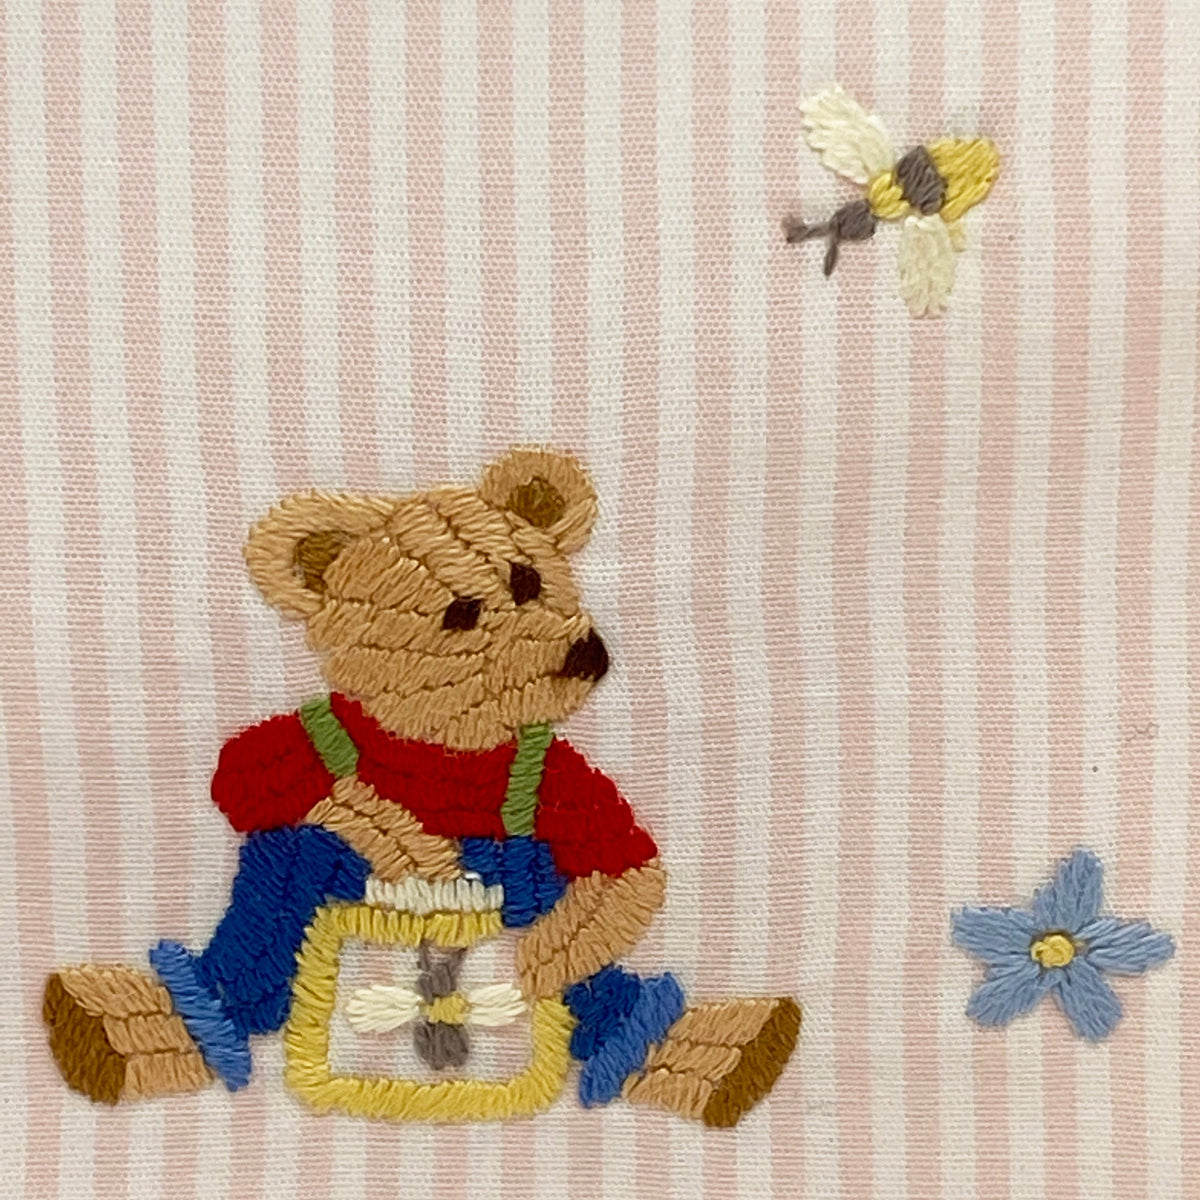 teddy detail on tissue box cover